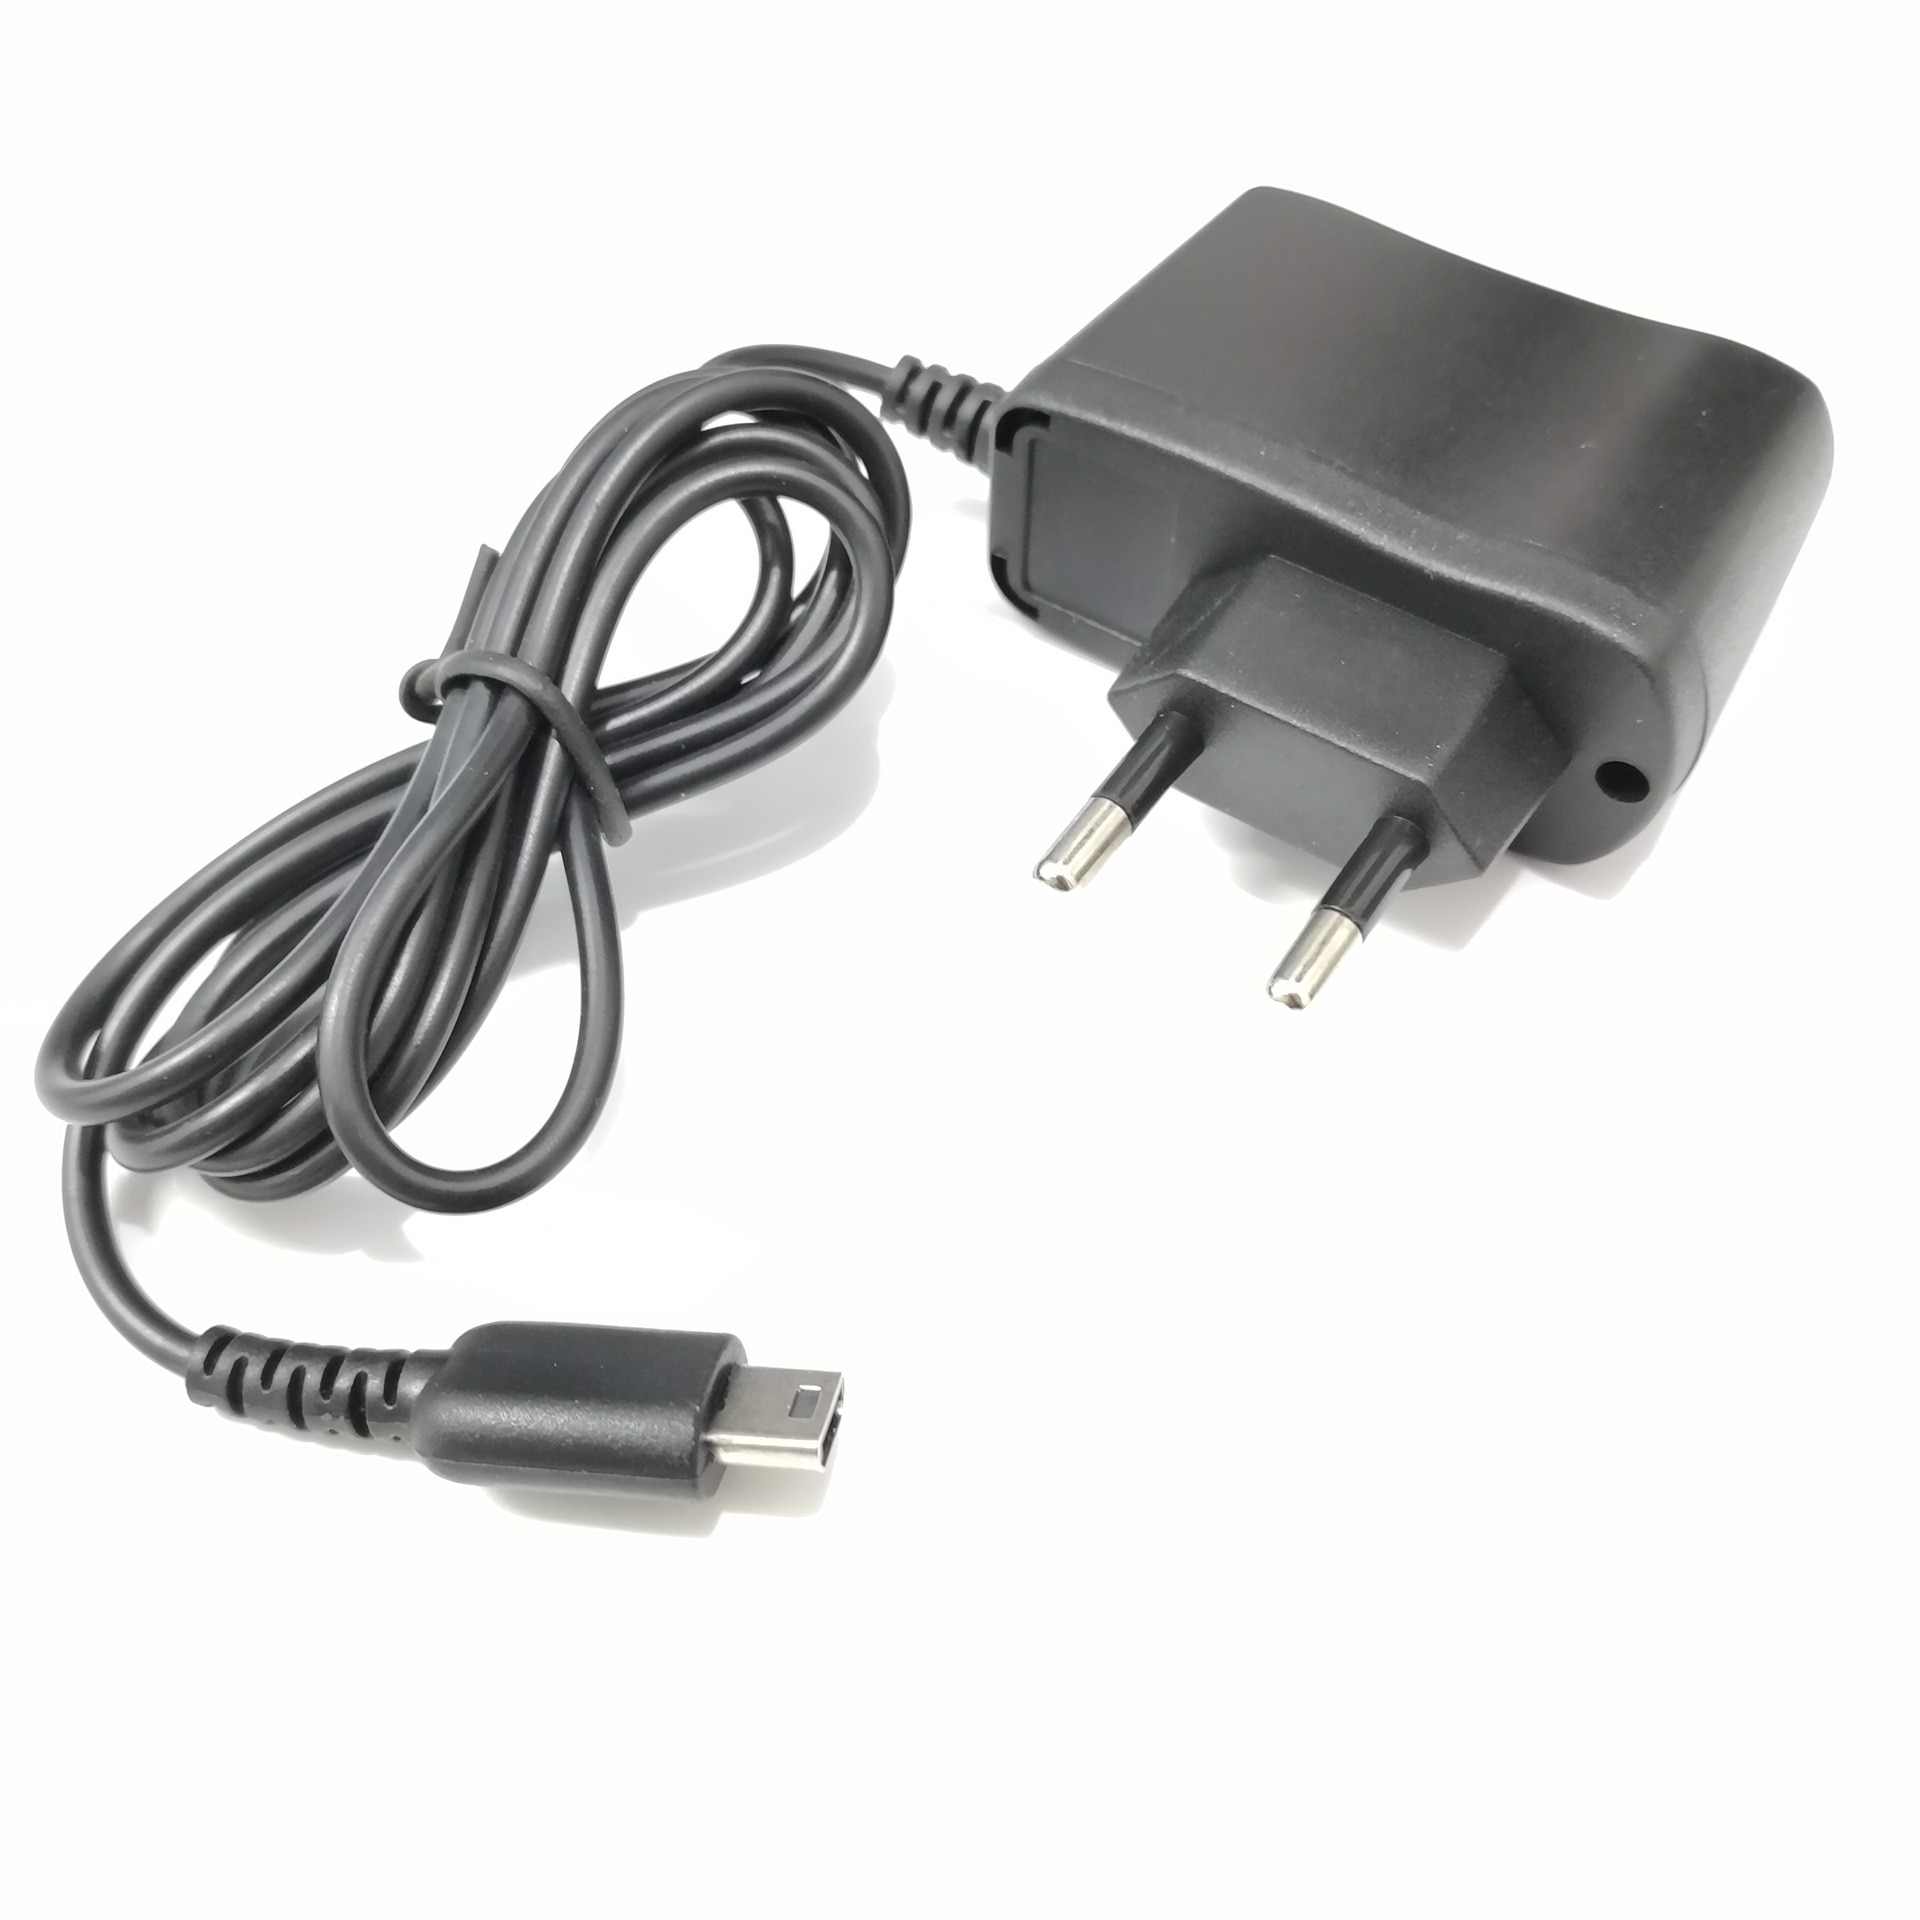 Eu Plug Charger Voeding Ac Adapter Voor Nintendo Dsl Ds Lite Ndsl Console